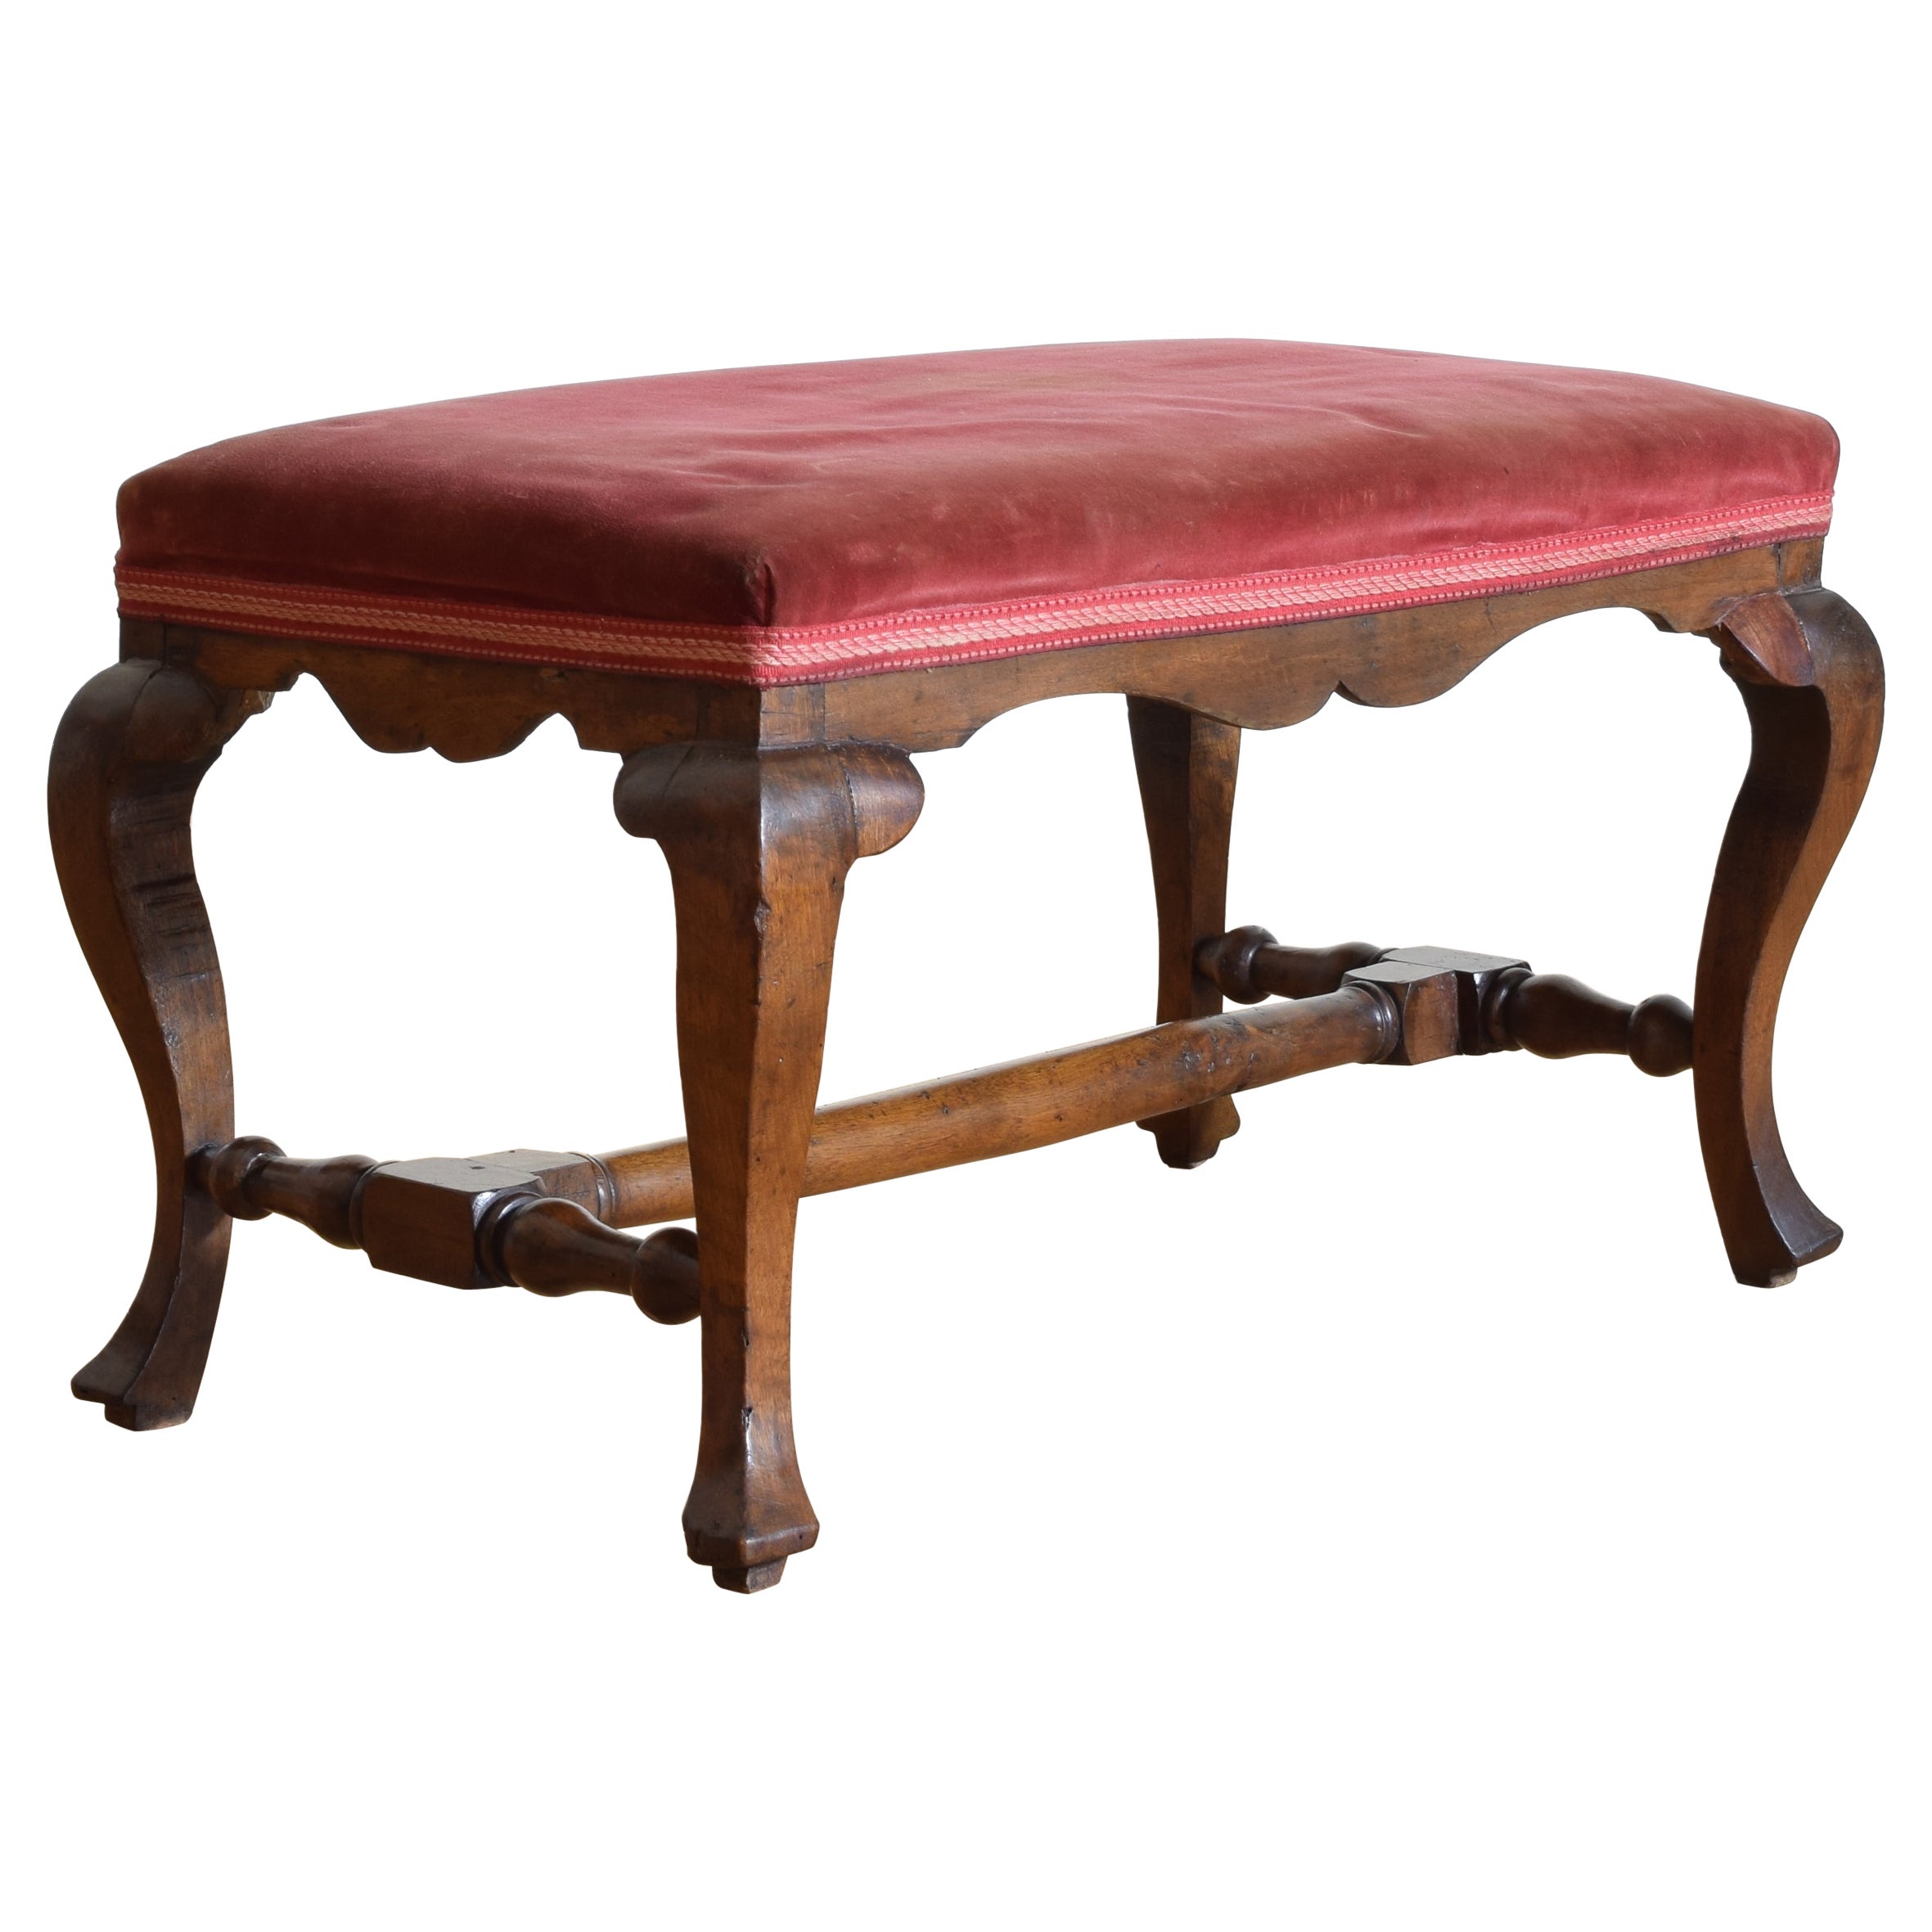 Italian, Tuscany, Rococo Period Carved Walnut & Upholstered Bench, mid 18th cen.